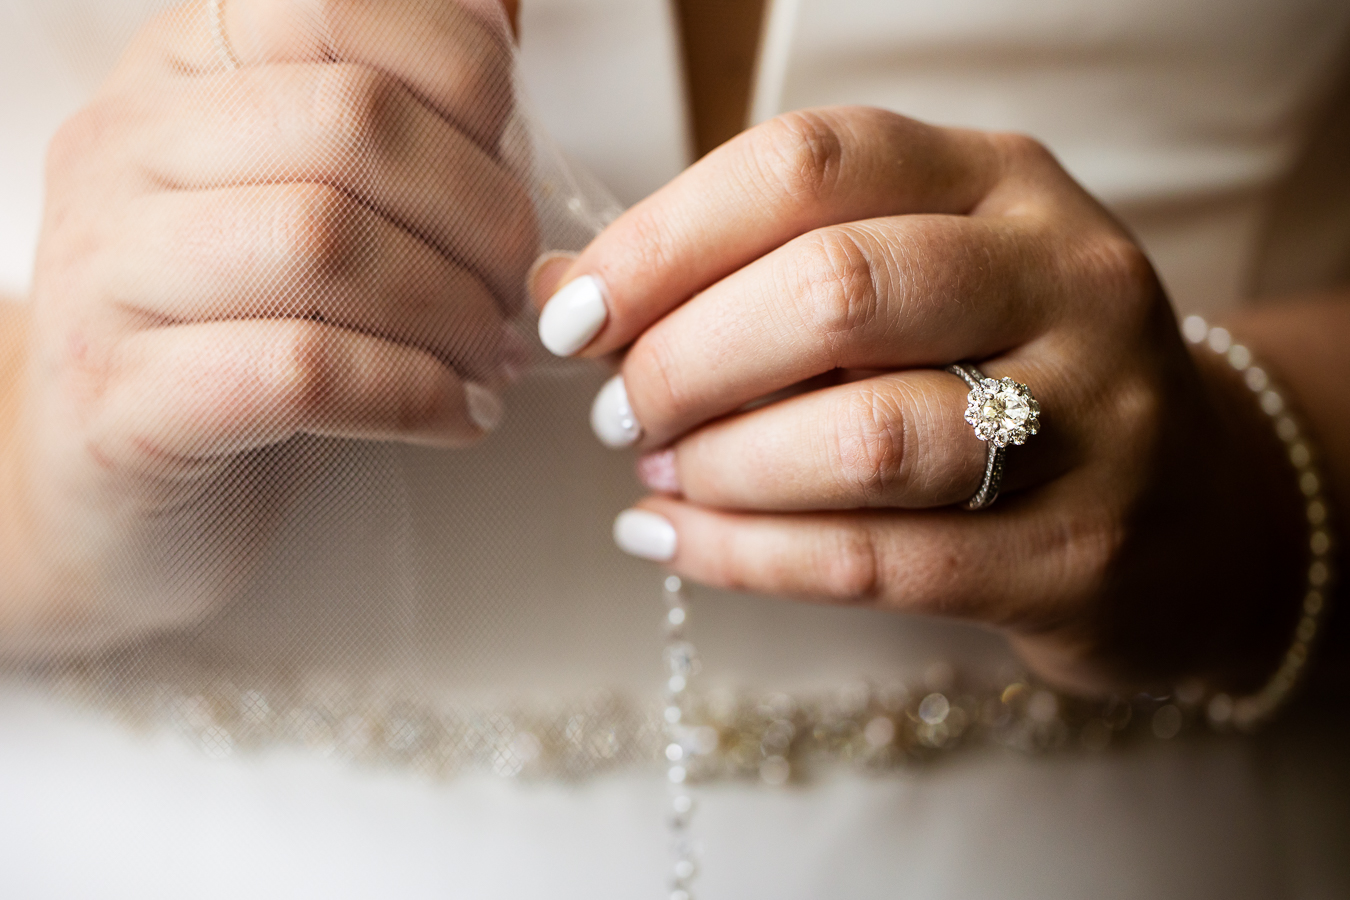 Best PA wedding photographer, lisa rhinehart, captures this close up image of the brides white nails, sparkling ring and her wedding veil before her wedding ceremony in Virginia 